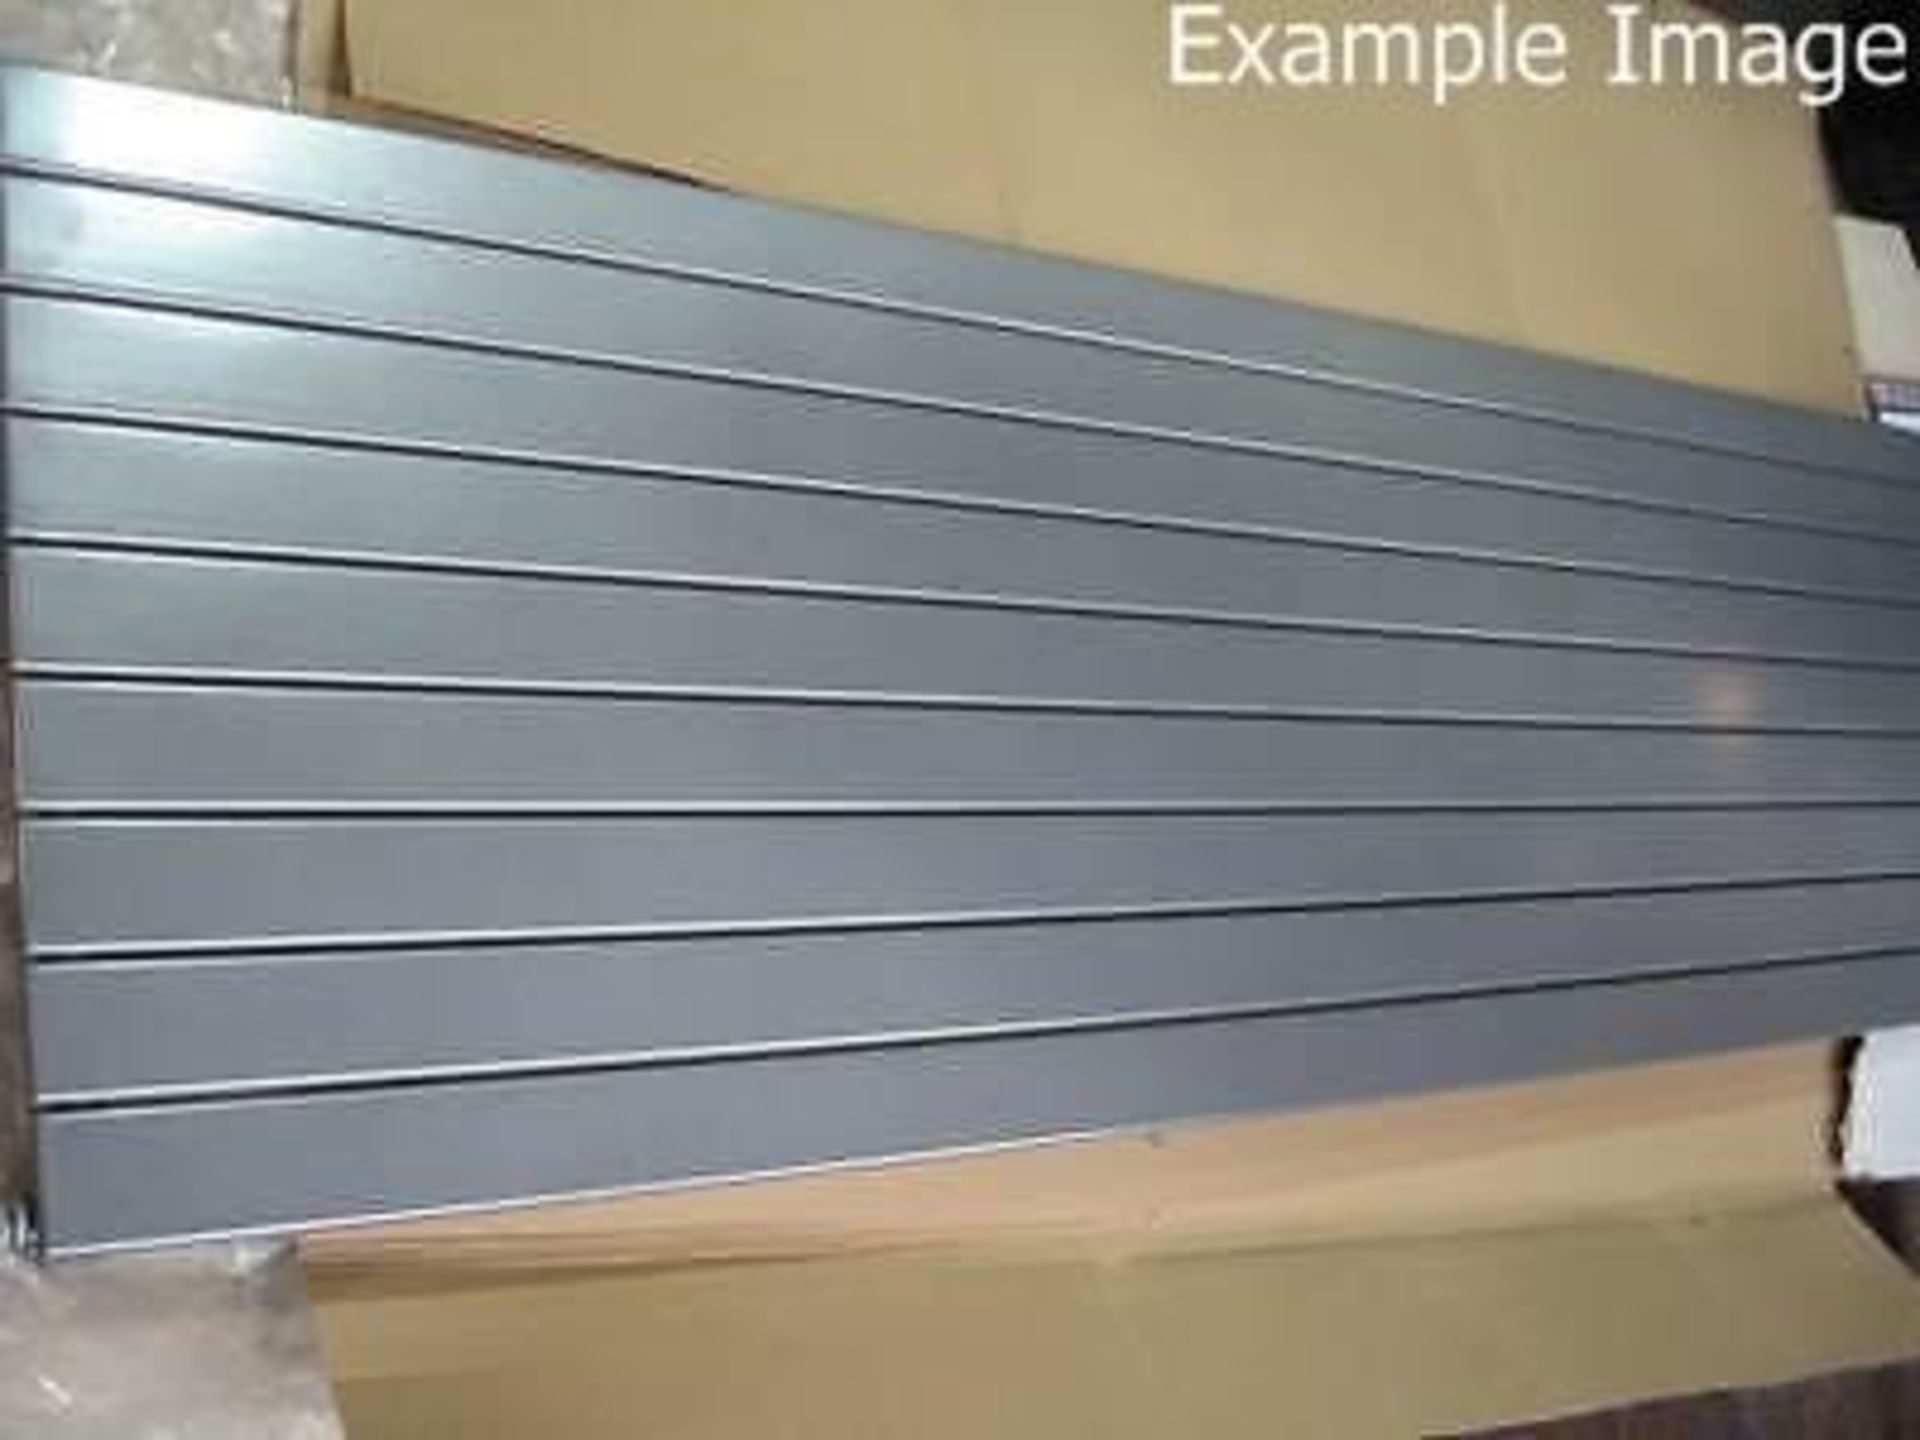 1 x Quinn Slieve Designer Single Panel Radiator in Silver - Contemporary Design - Will Enhance any - Image 4 of 4